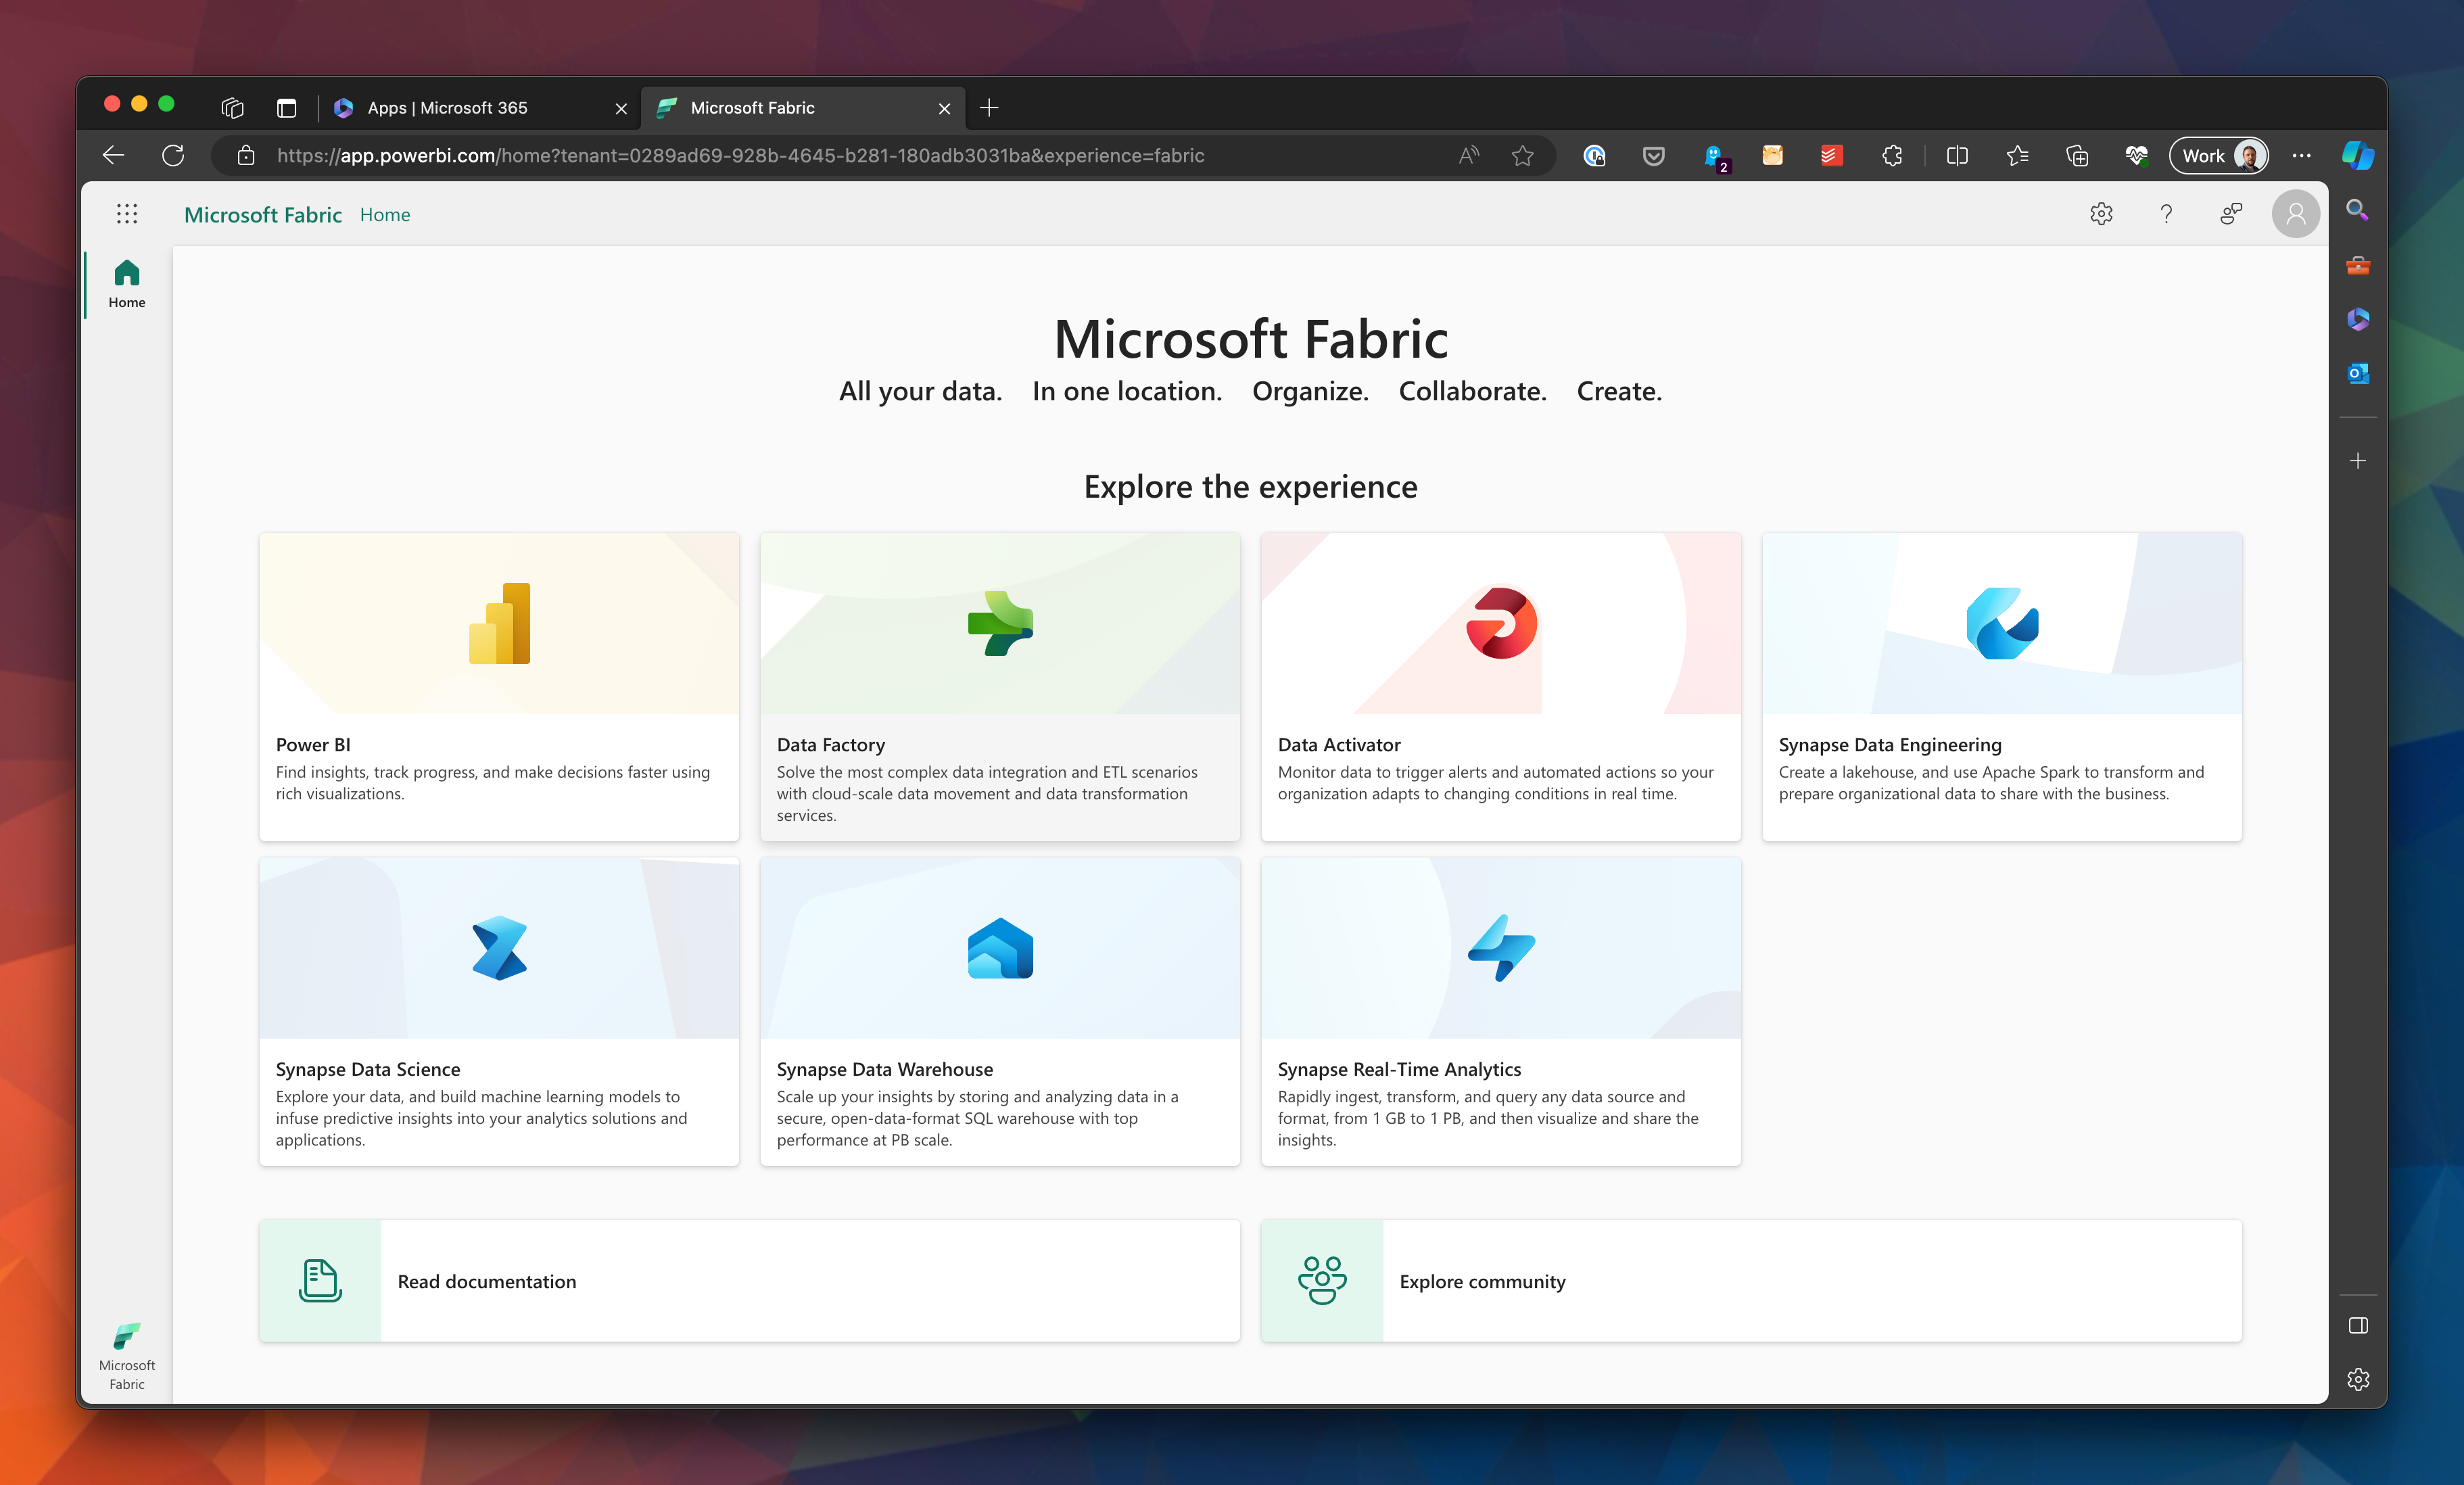 Shows the Fabric Homepage. There are multiple experiences available from this page - Power BI, Data Factory, Data Activator, Synapse Data Engineering, Synapse Data Science, Synapse Data Warehouse and Synapse Real-Time Analytics.